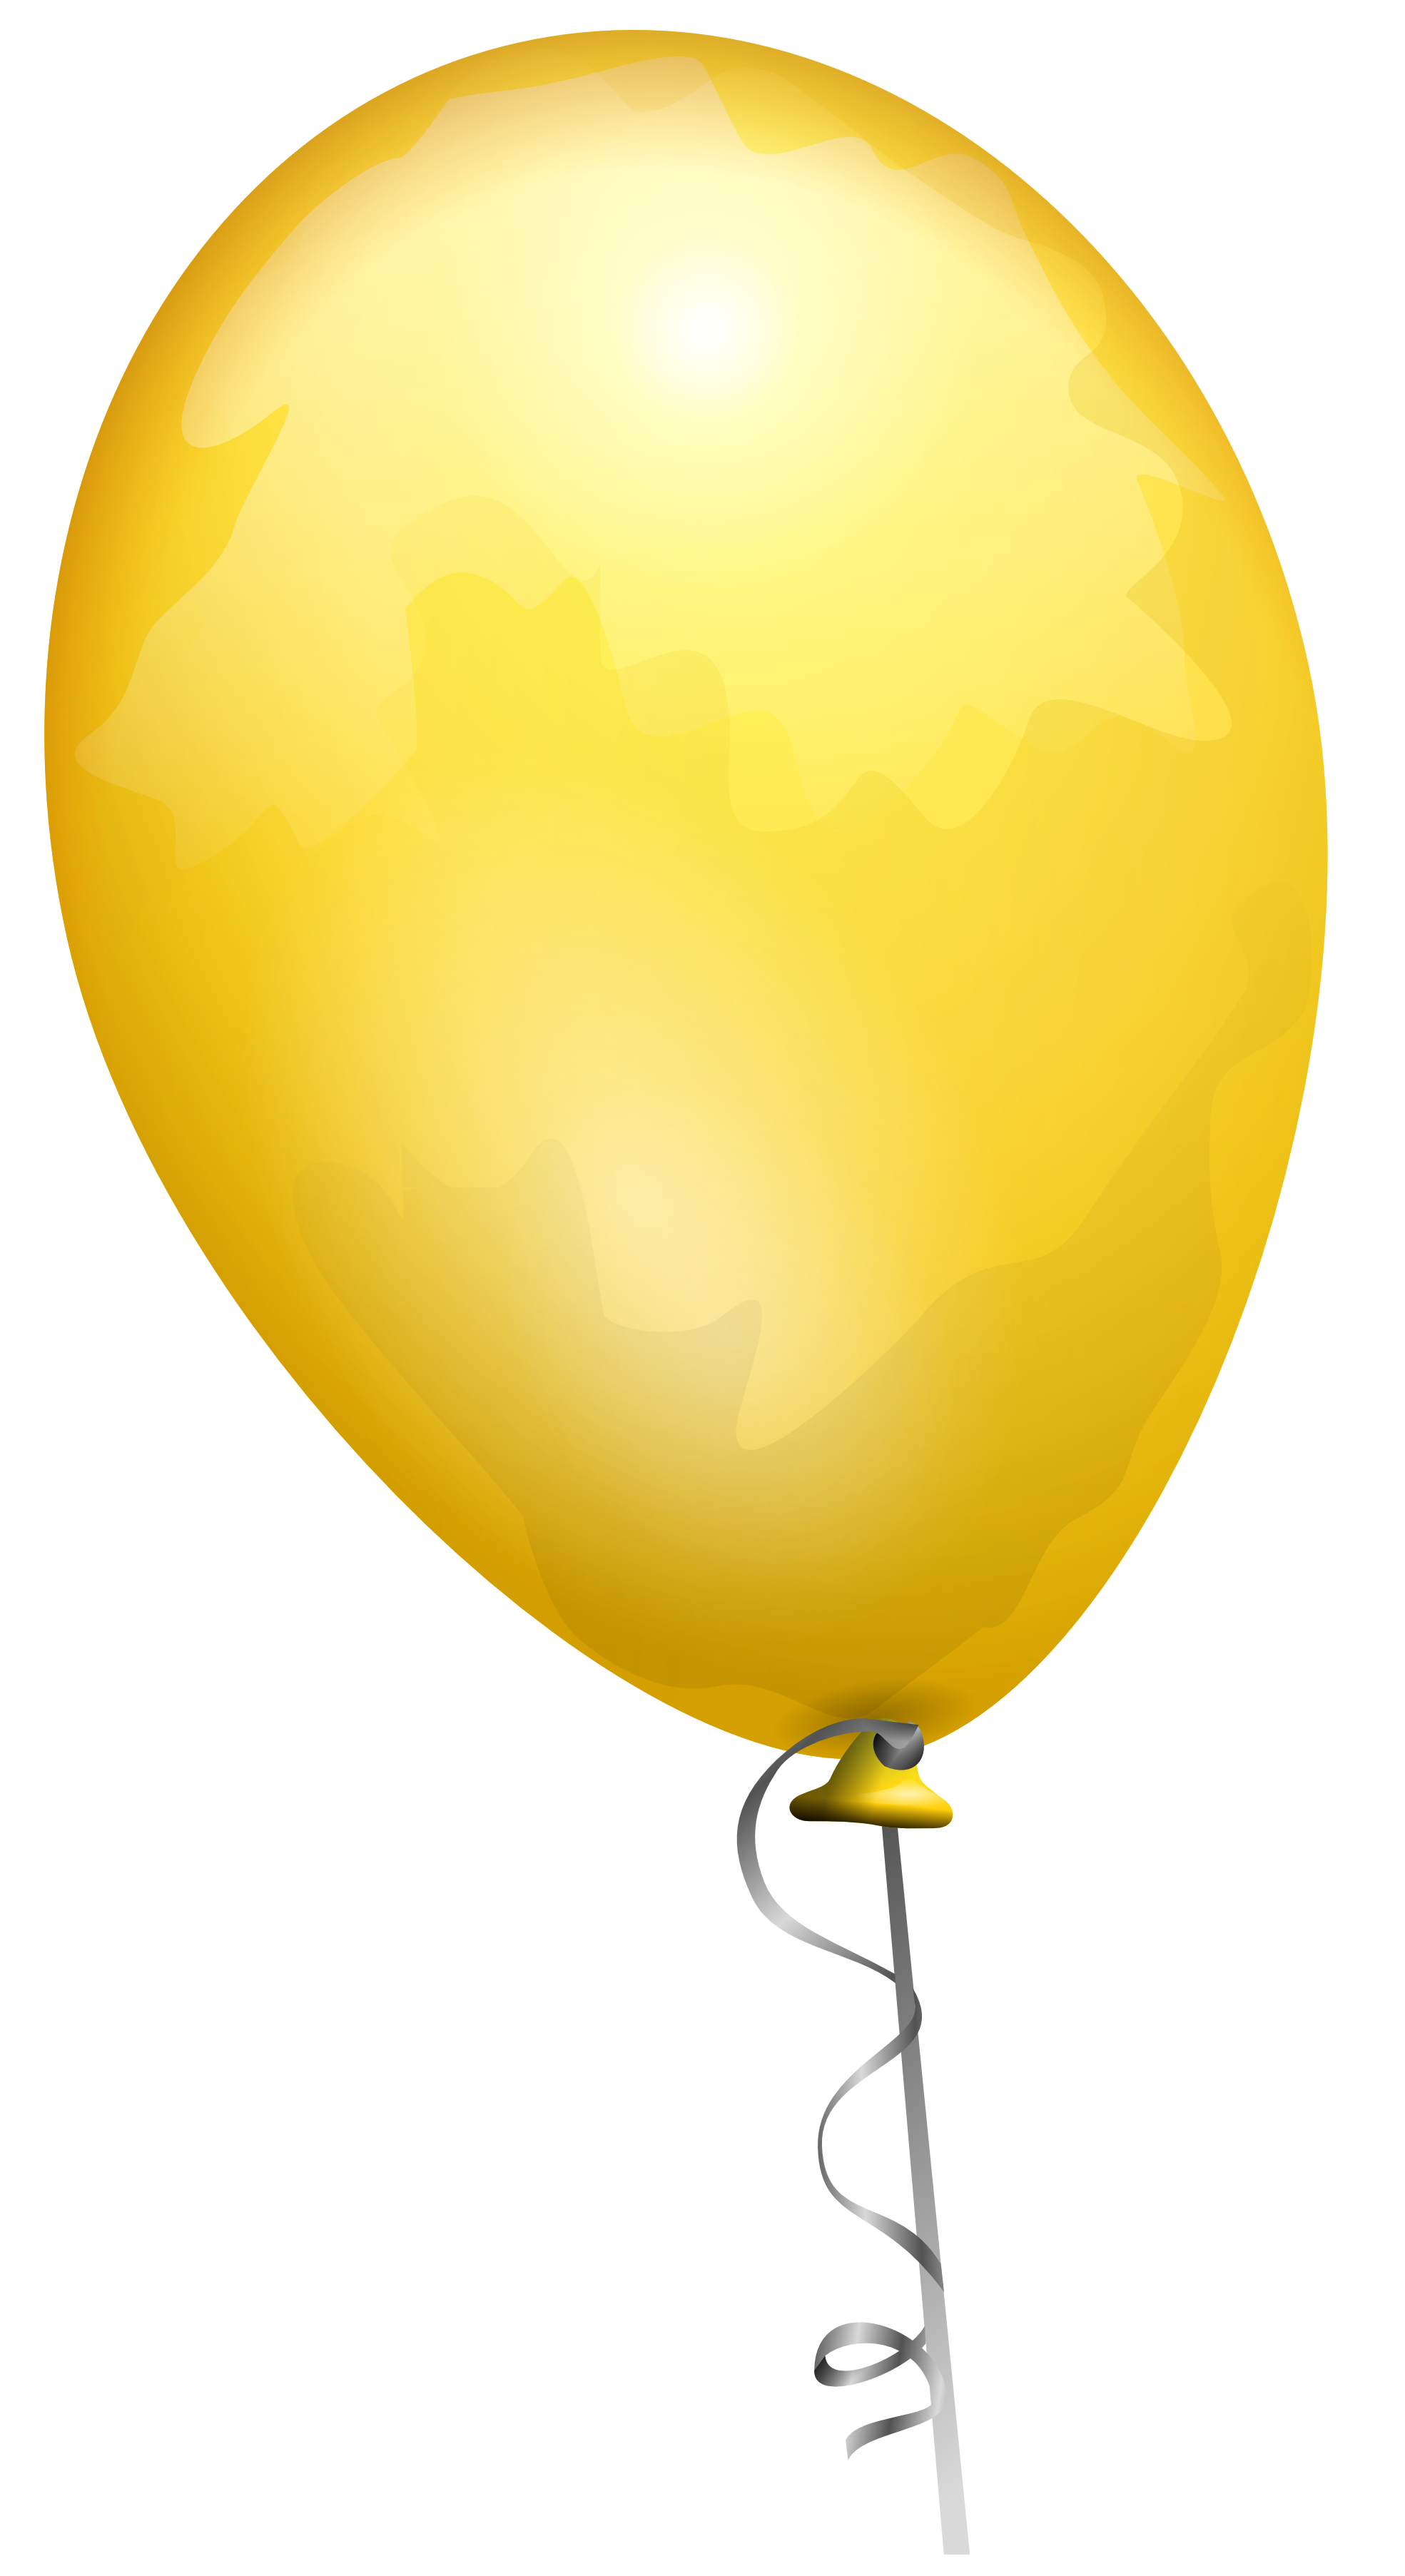 Yellow Balloon PNG Background Image